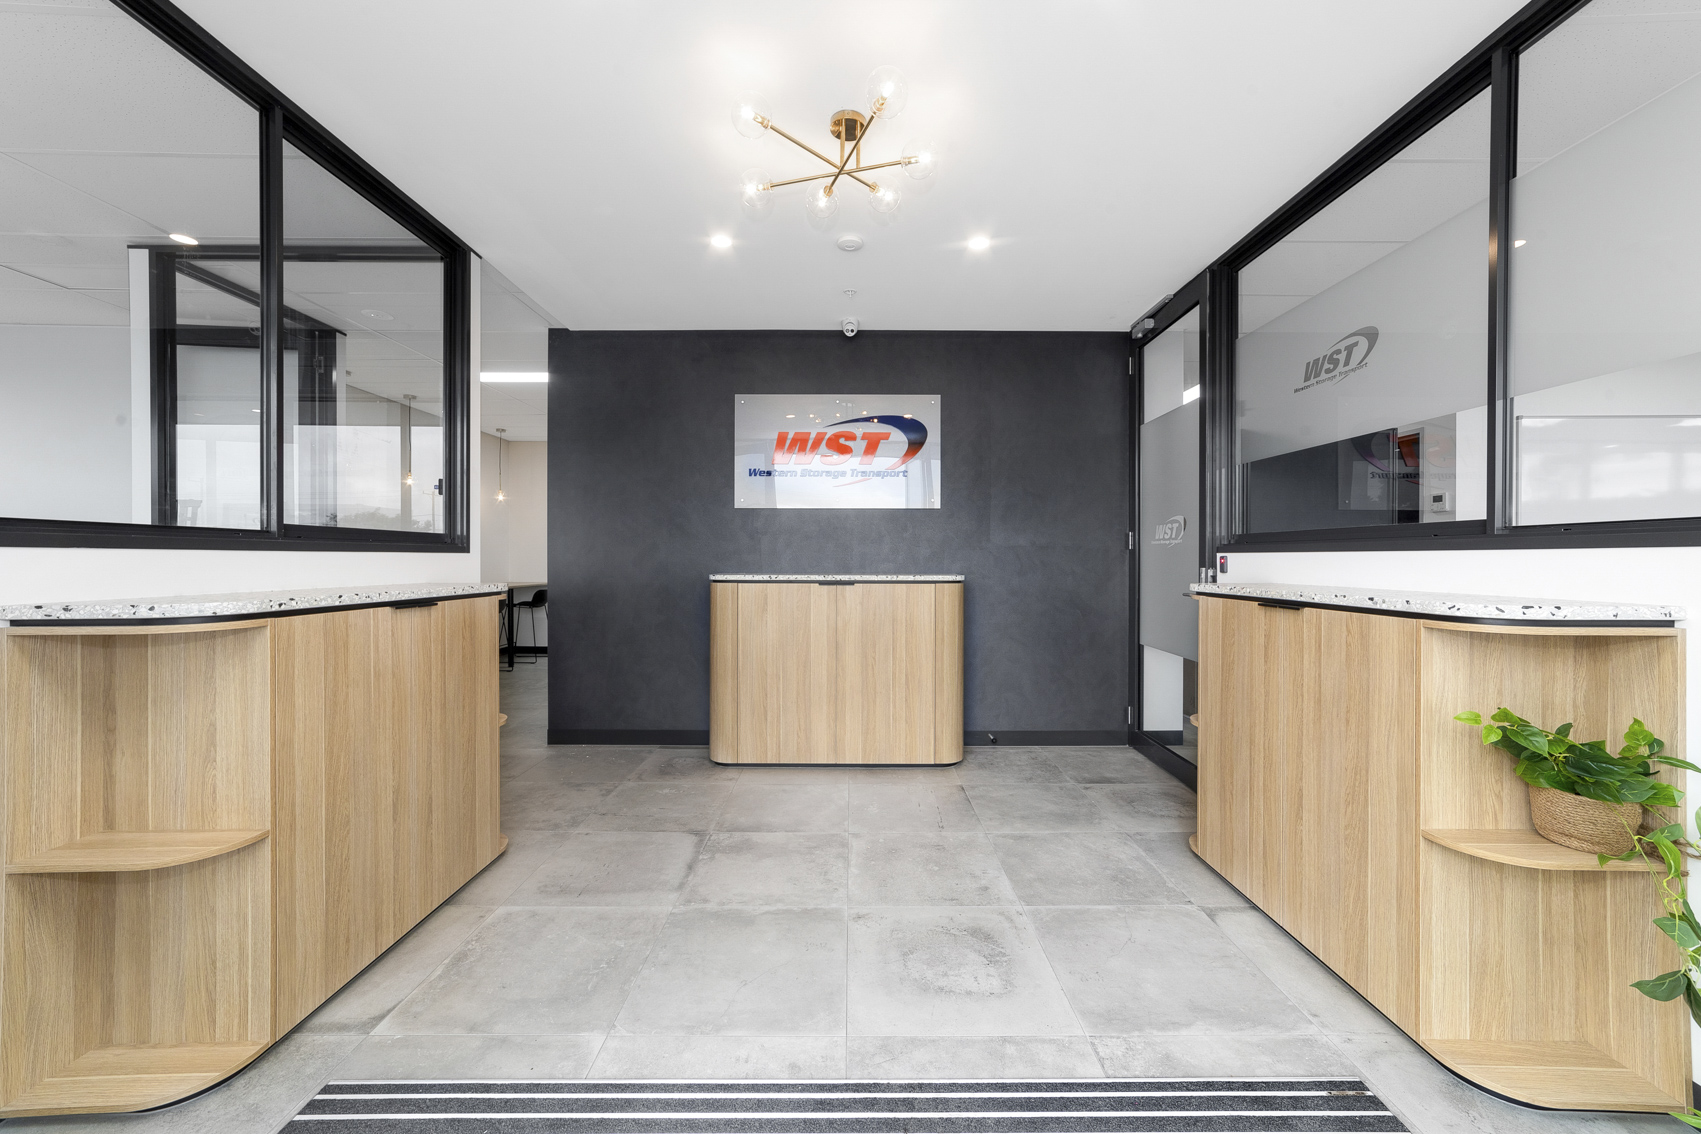 Contemporary office reception area featuring wooden countertops, a charcoal accent wall with a "WST - Western Storage Transport" logo, a chic gold chandelier, and clear glass dividers.